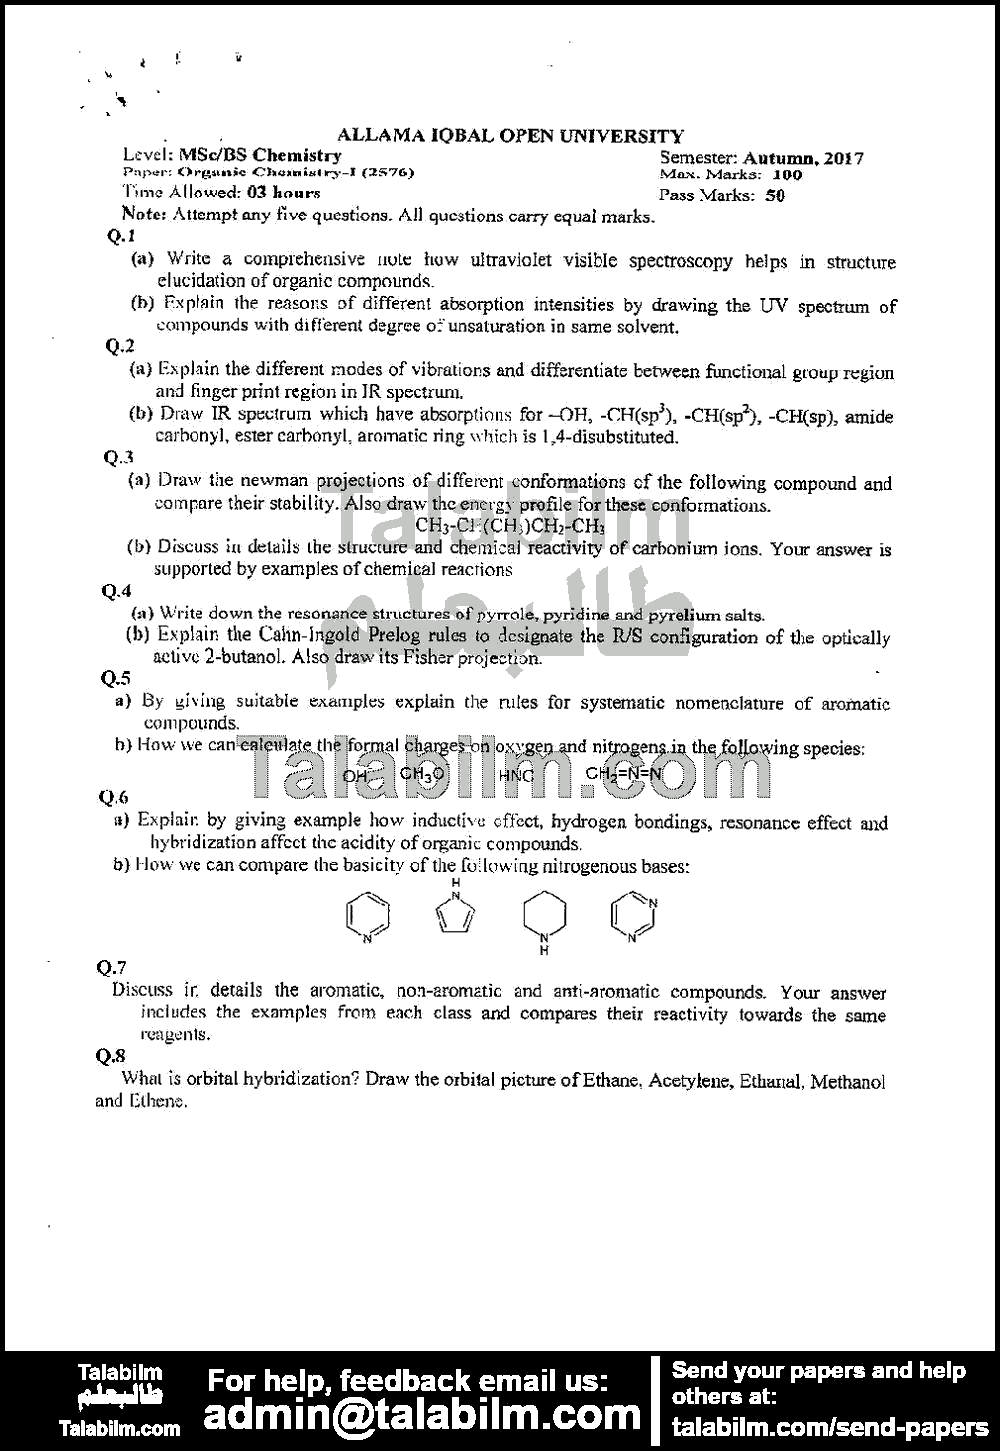 Organic Chemistry-I 2576 past paper for Autumn 2017